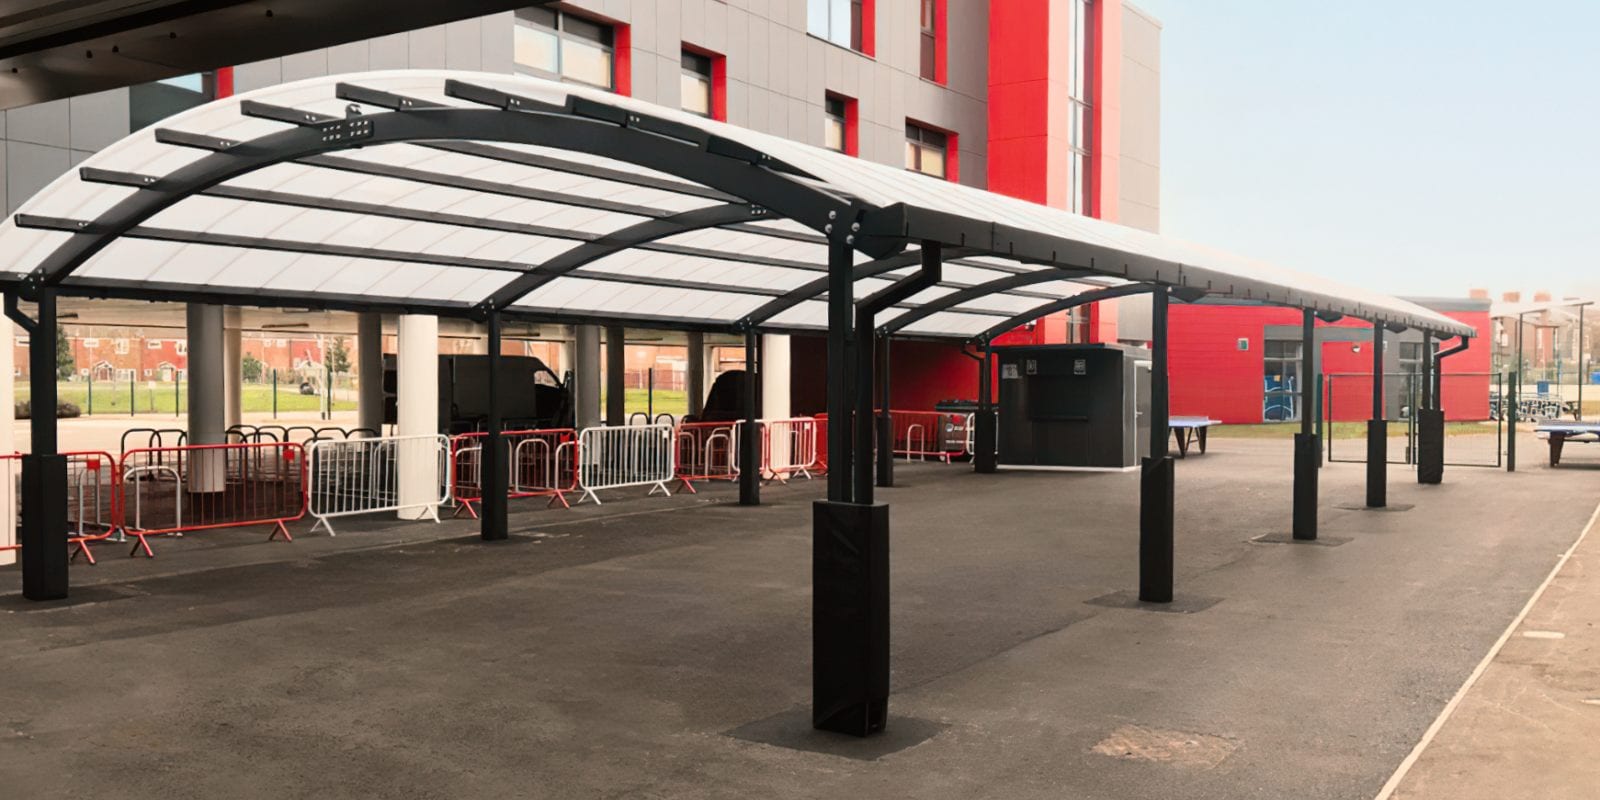 Dining canopy we designed for Dean Trust Ardwick